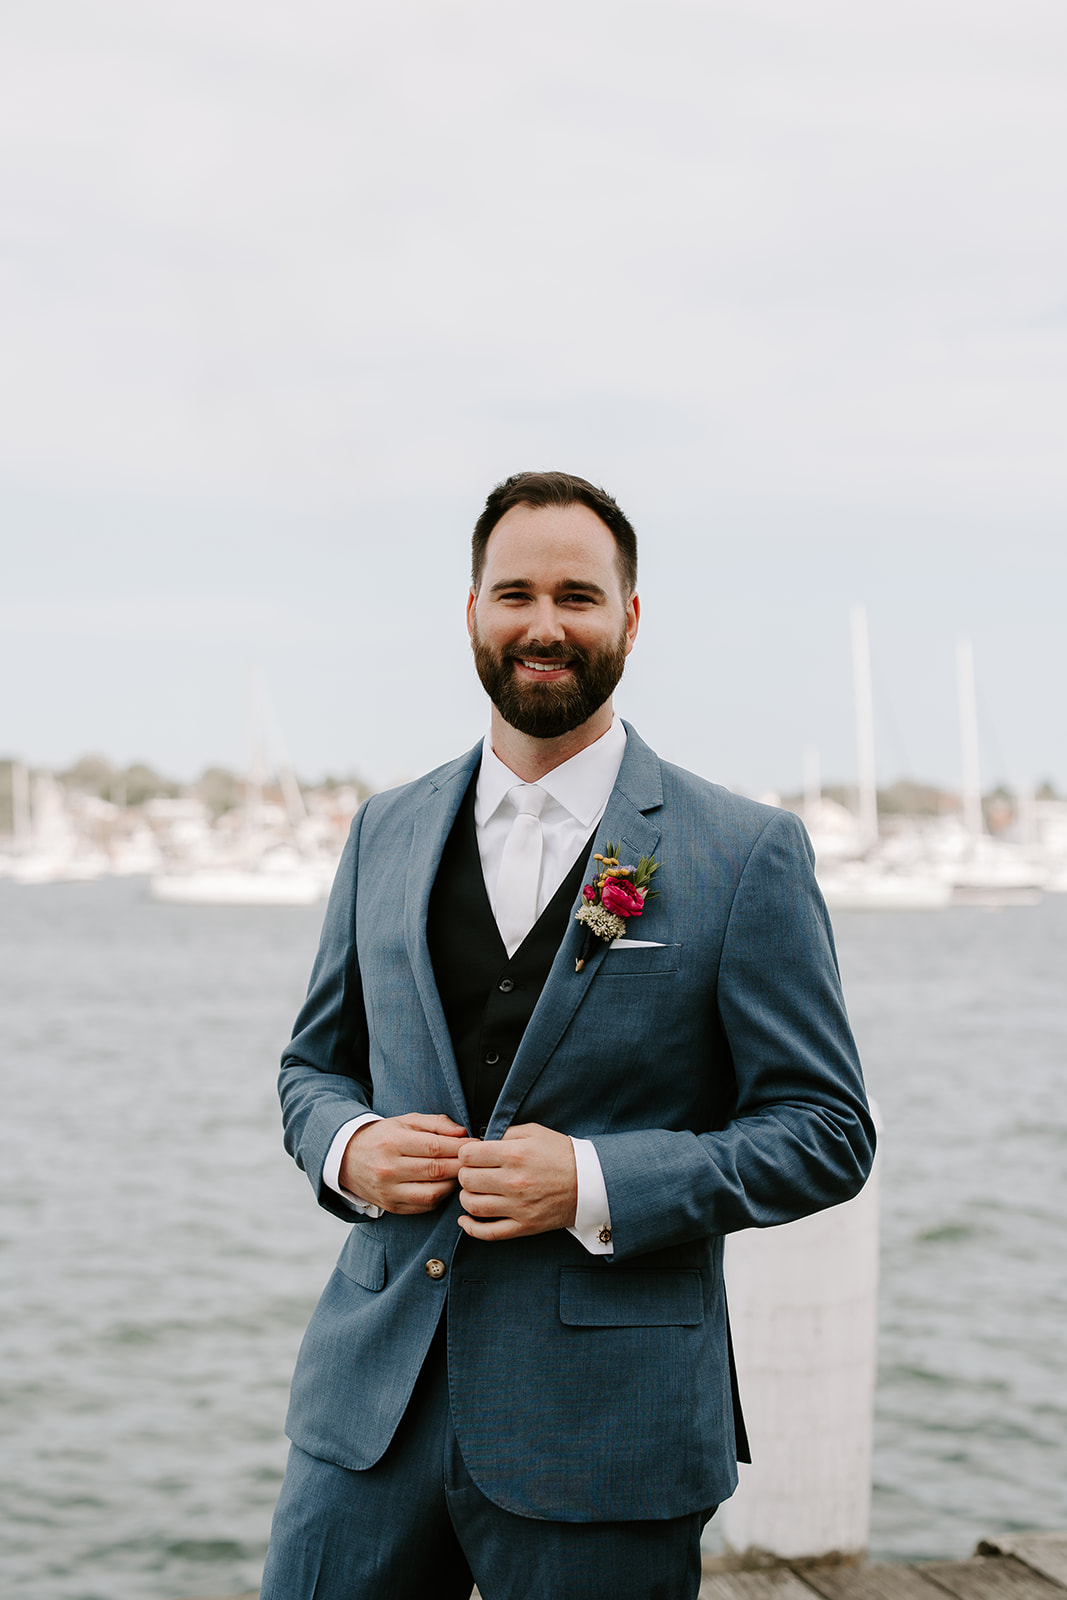 Handsome groom poses with the sea in the background